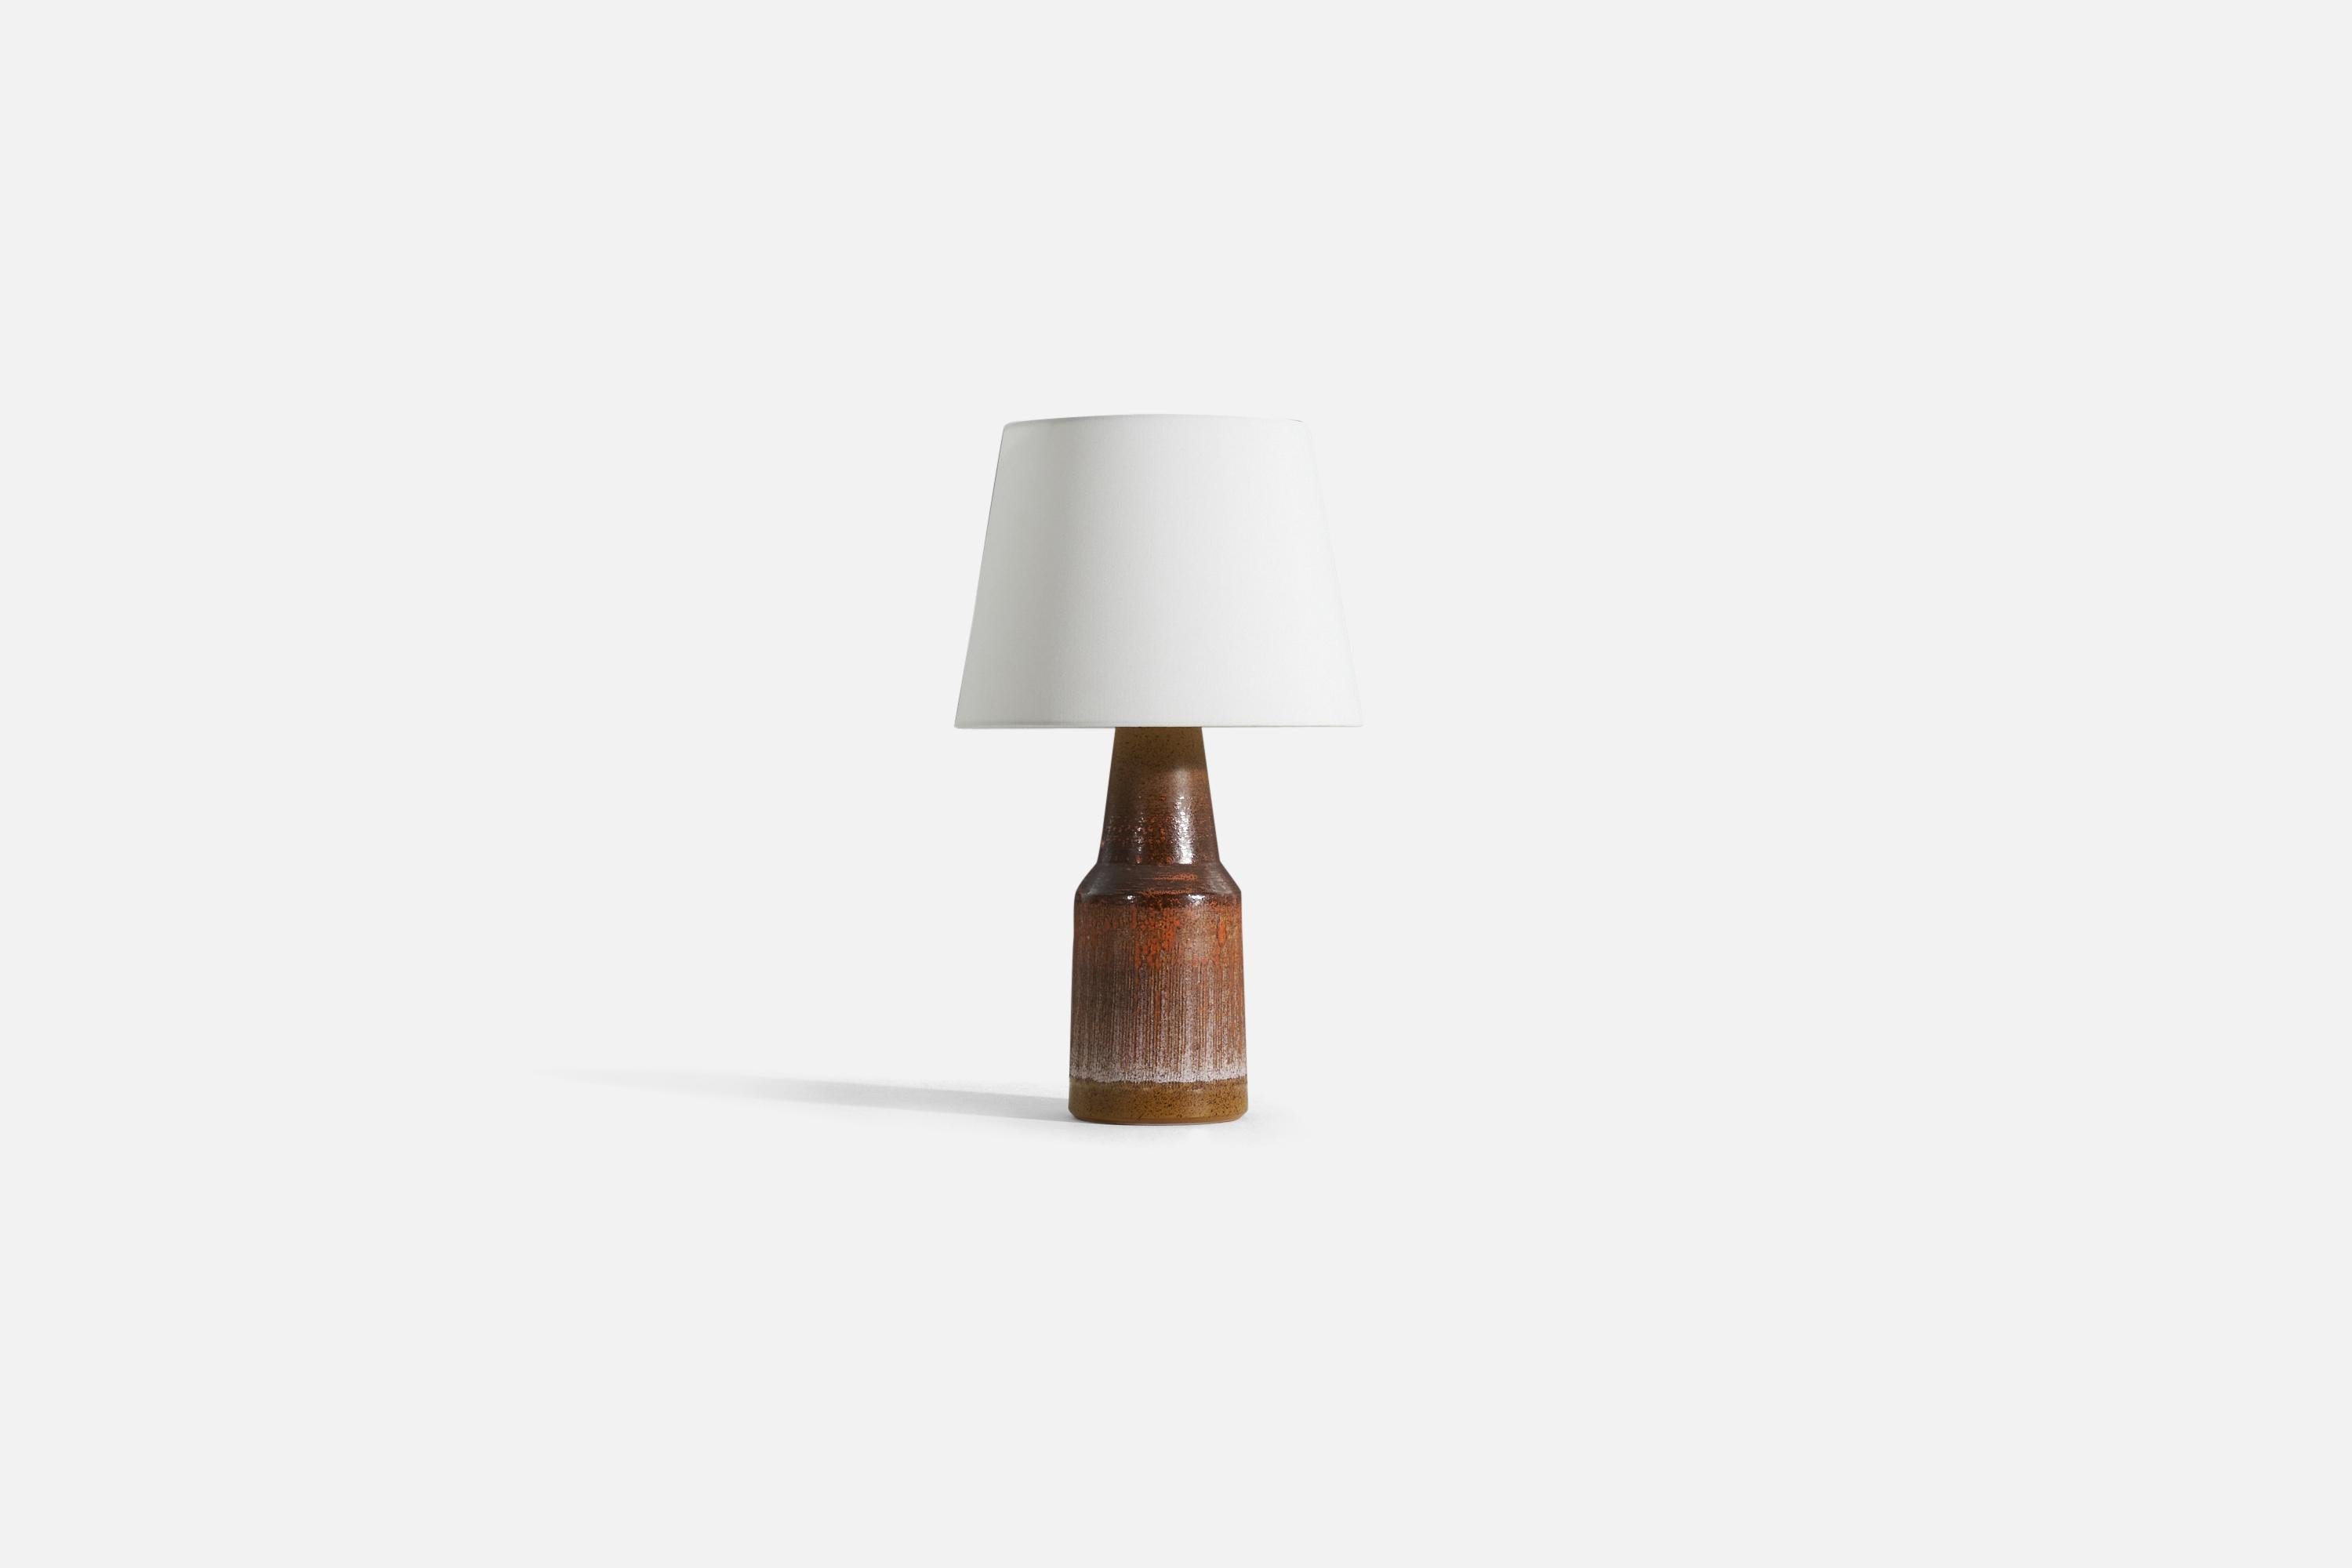 A glazed stoneware table lamp by Tilgmans Keramik, 1950s. Features a complex glaze combined with incised decor in a style iconic to the producer. 

Sold without lampshade. 
Dimensions of Lamp (inches) : 16.5 x 5.5 x 5.5 (H x W x D)
Dimensions of